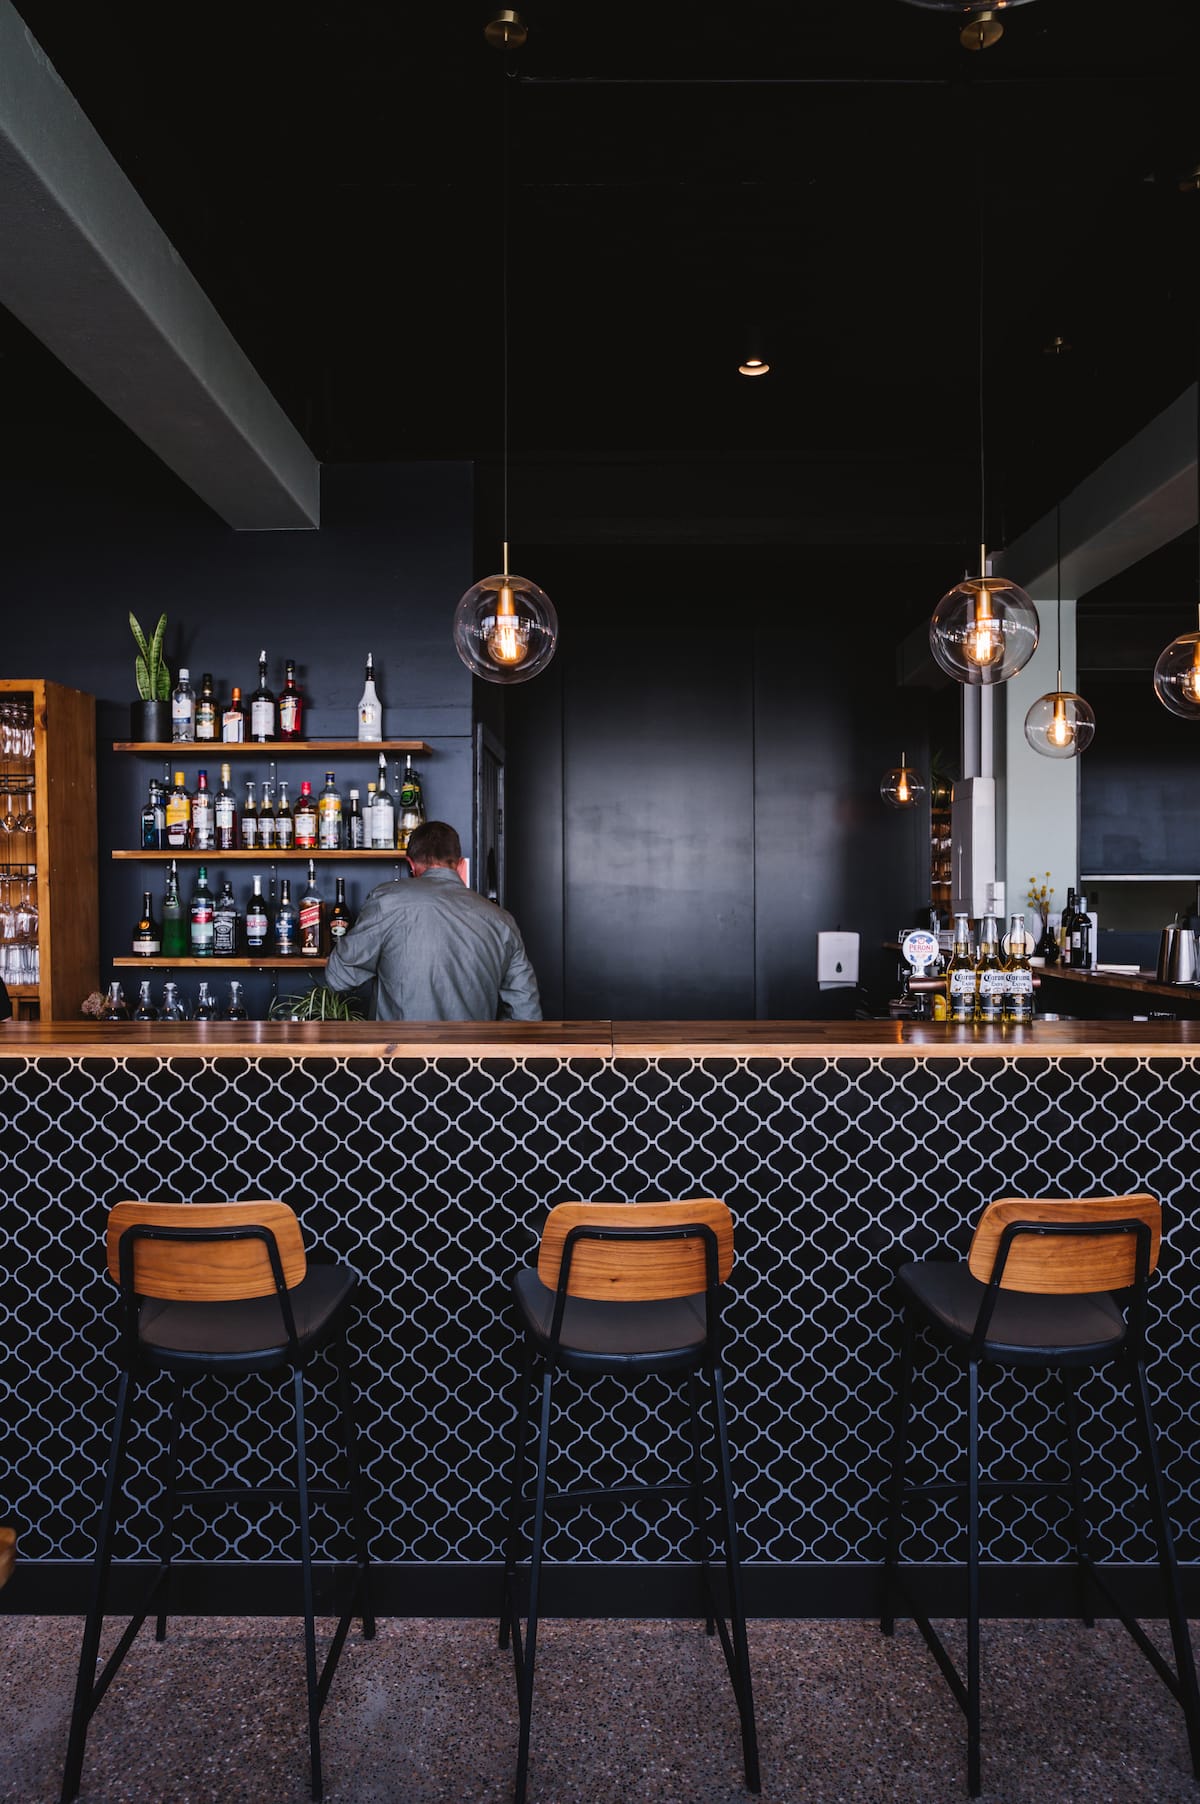 Open for two dinner sittings from Wednesday to Saturday, Article 24 has quickly become a crowd favourite so make sure to book well and truly in advance to secure your spot at the newest New Lambton hot spot.